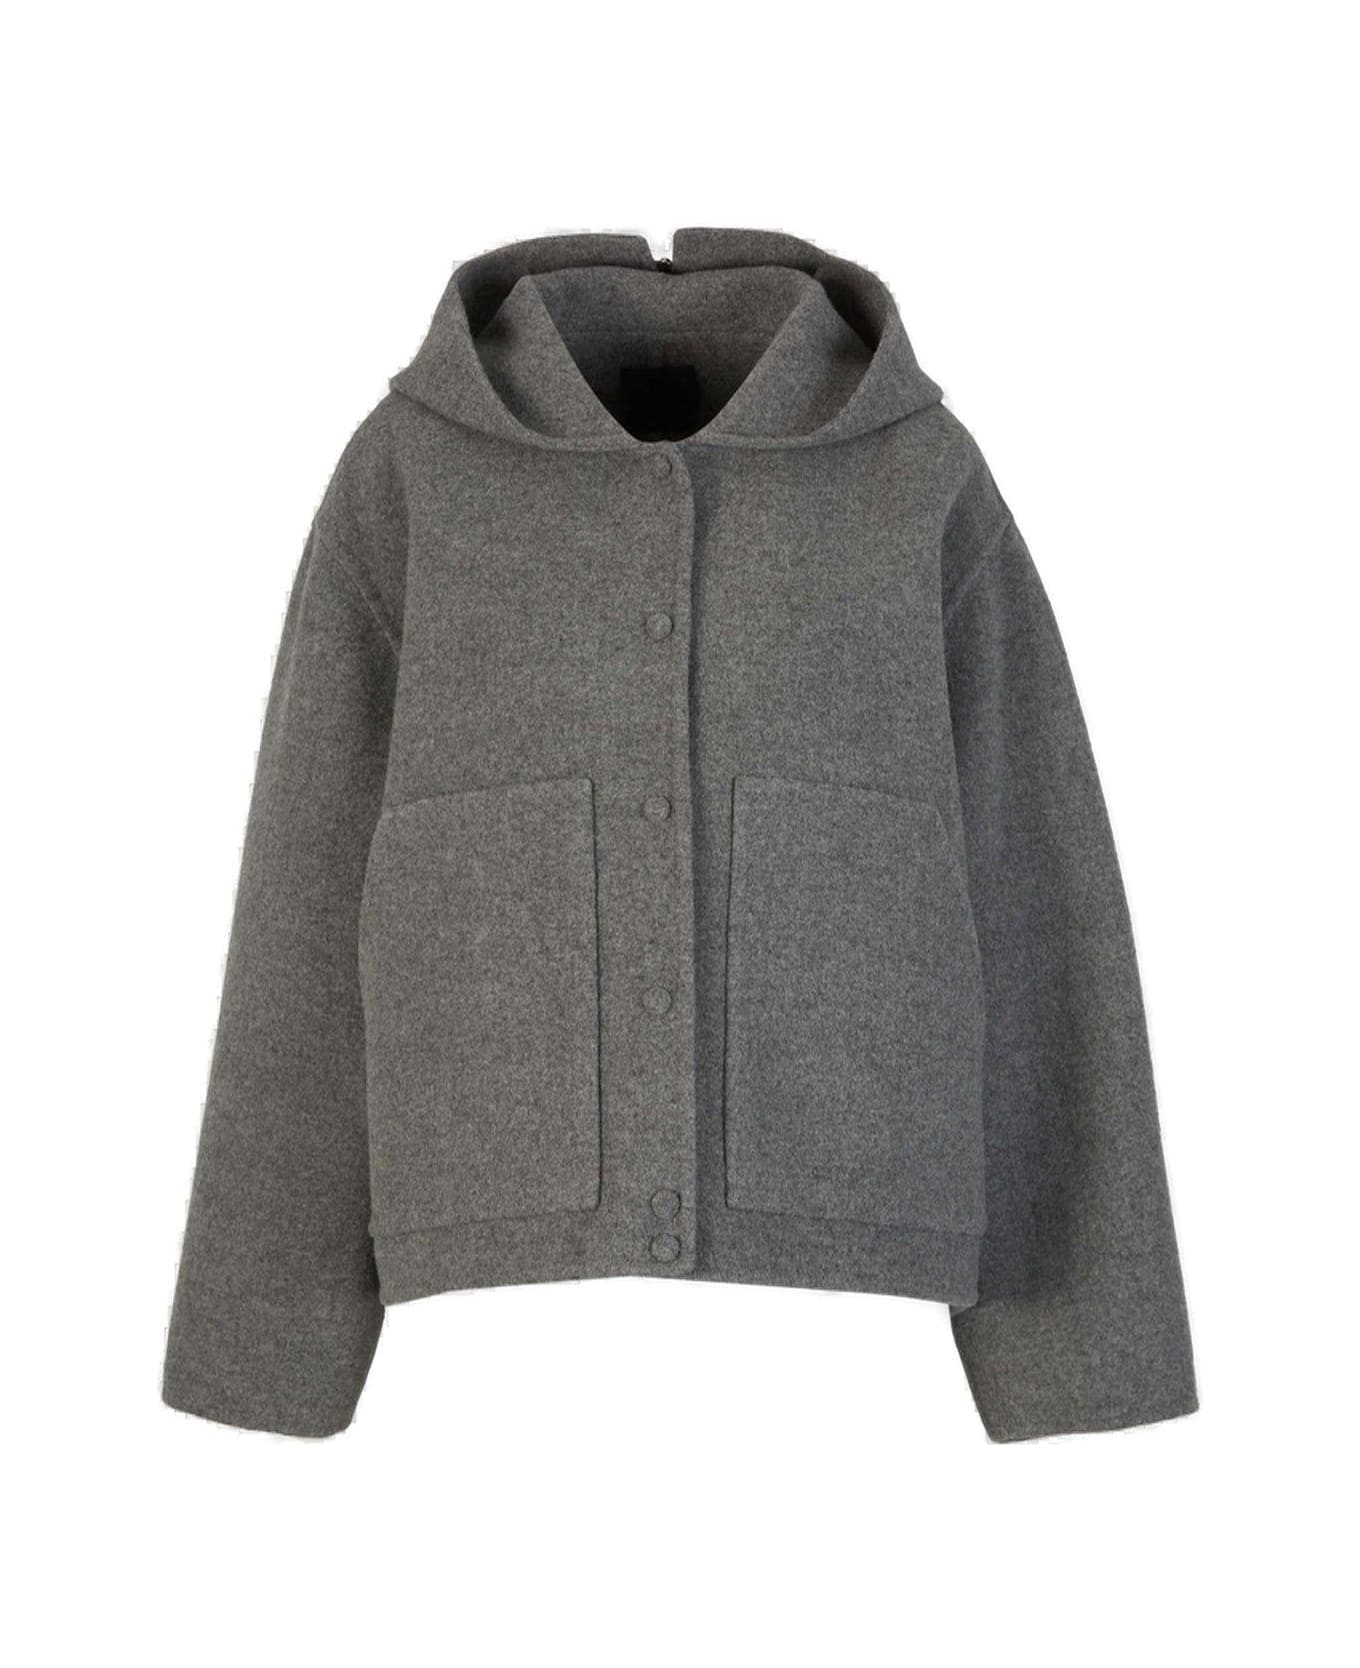 Givenchy Double Face Hooded Jacket - Grey